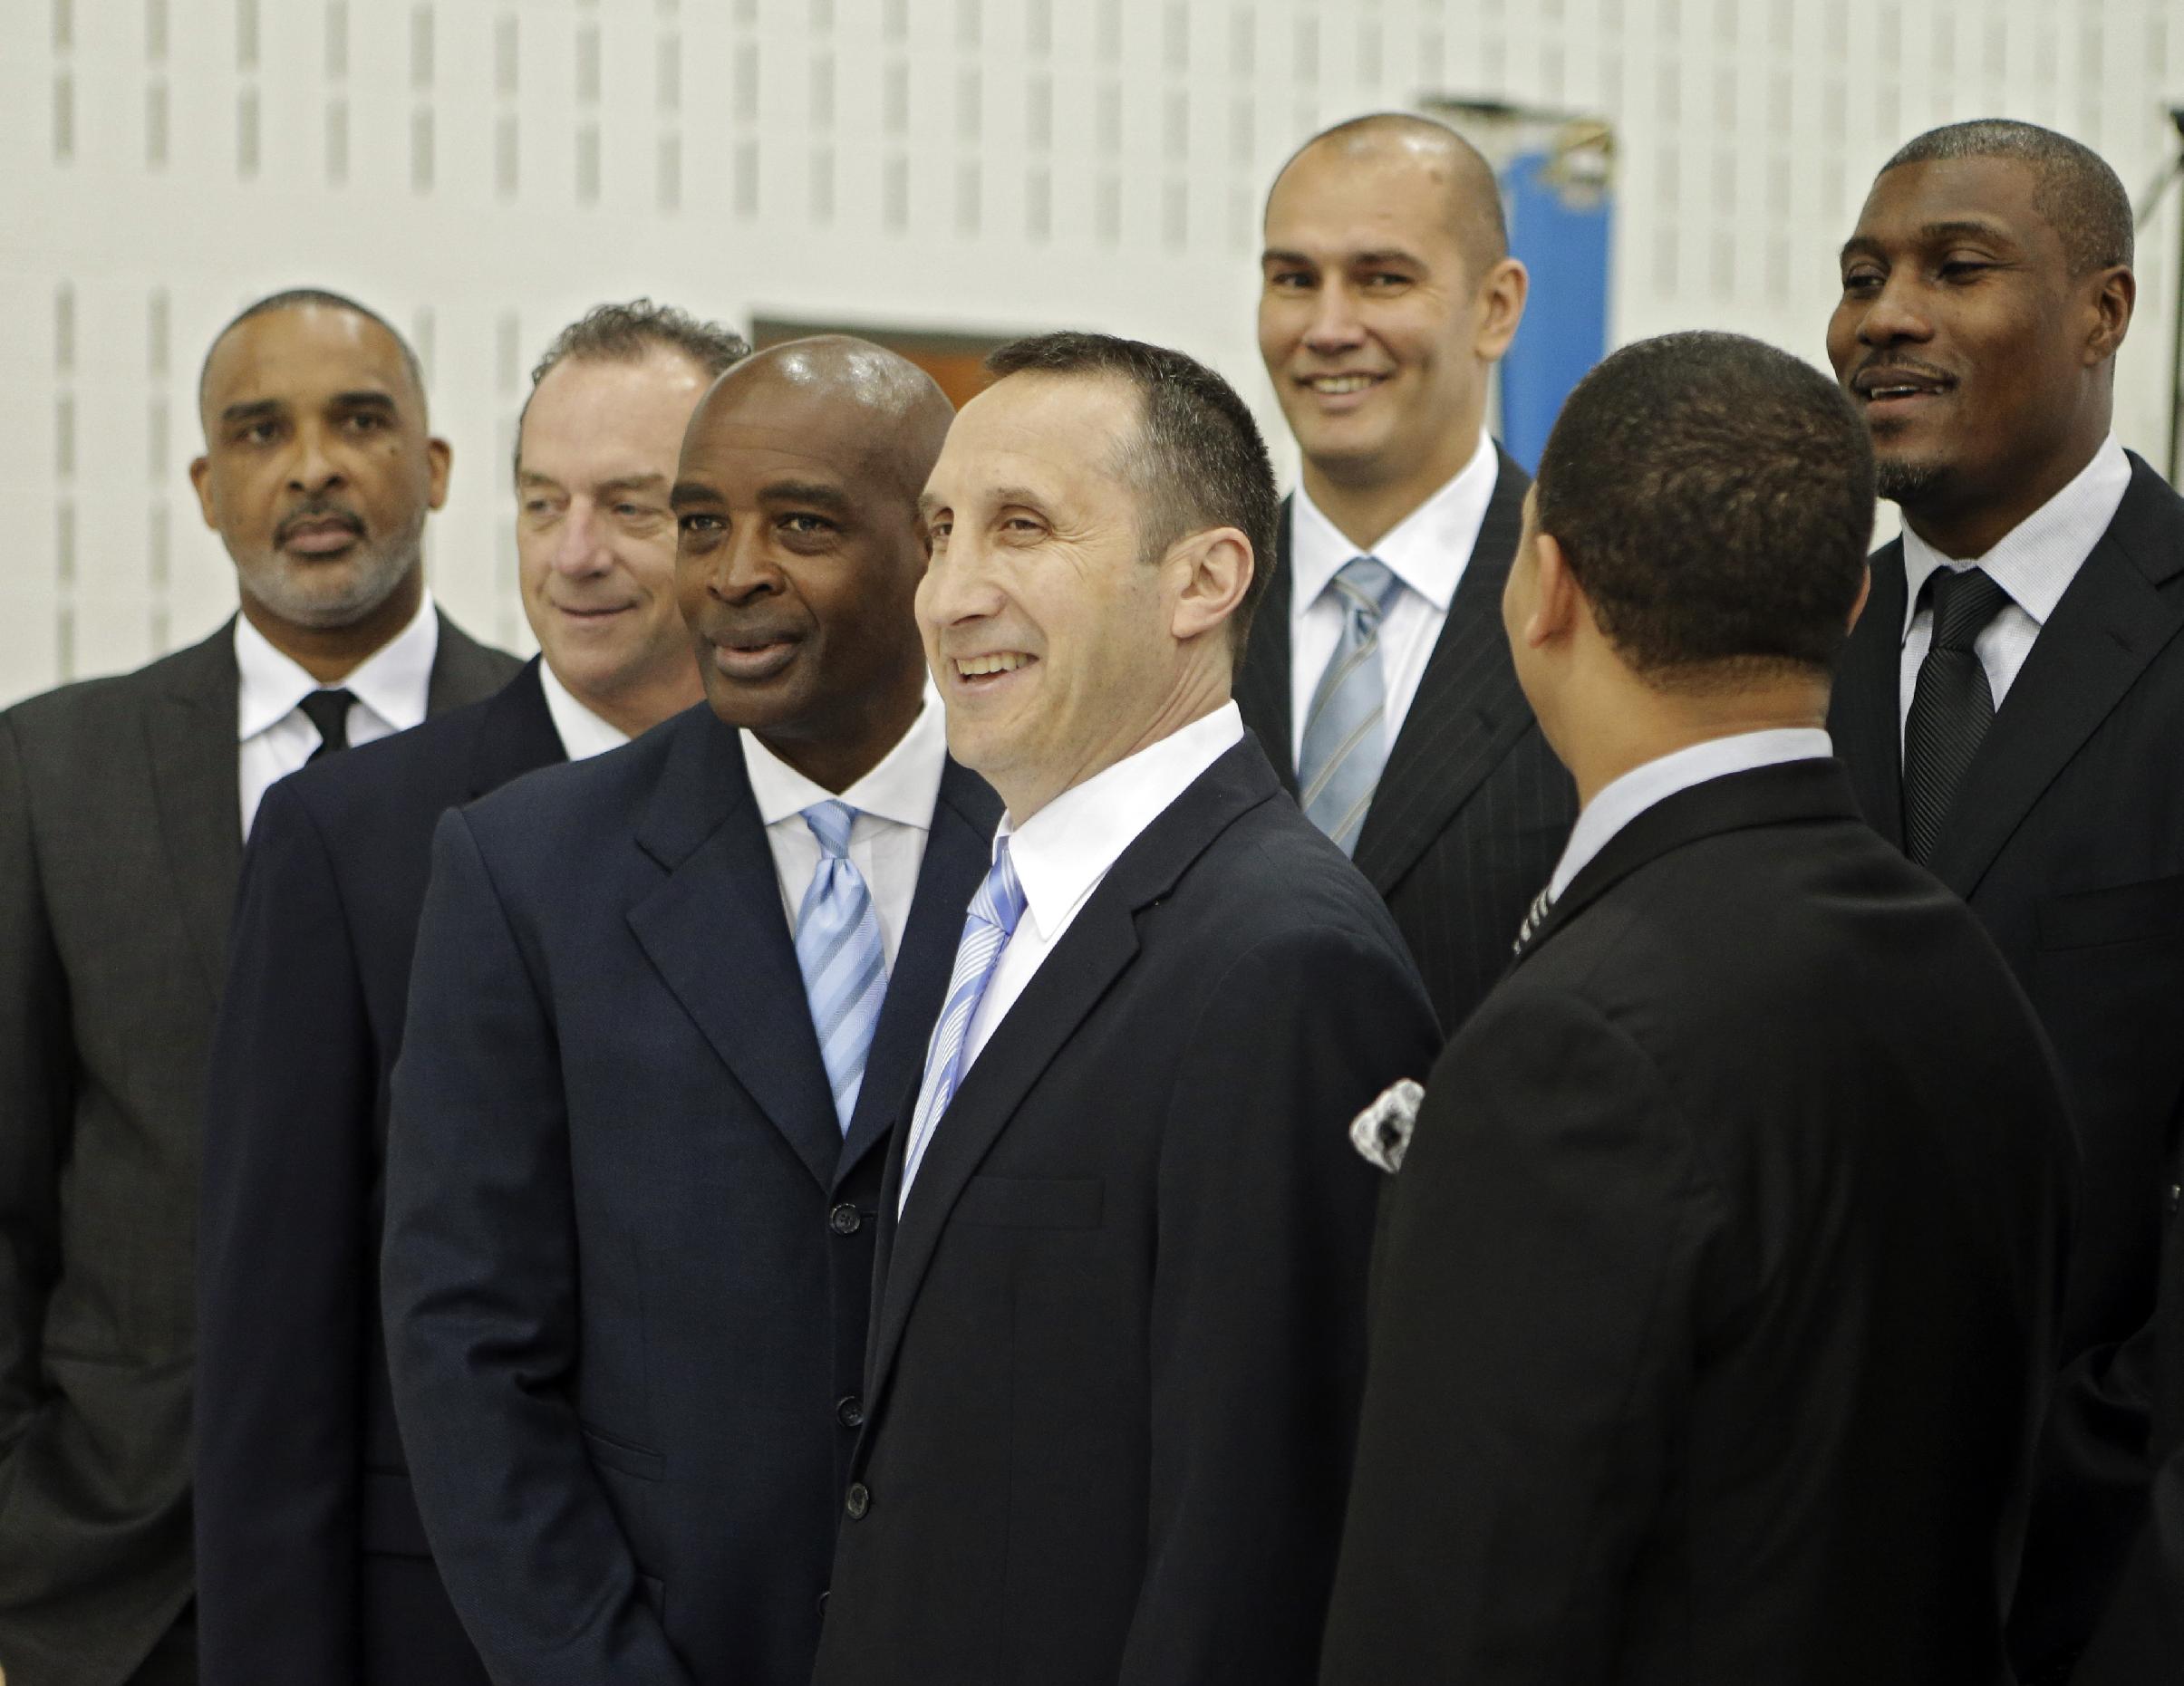 Cleveland Cavaliers head coach David Blatt, center, poses with his assistant coaches at the NBA basketball team's practice facility in Independence, Ohio  Friday, Sept. 26, 2014. (AP Photo/Mark Duncan)